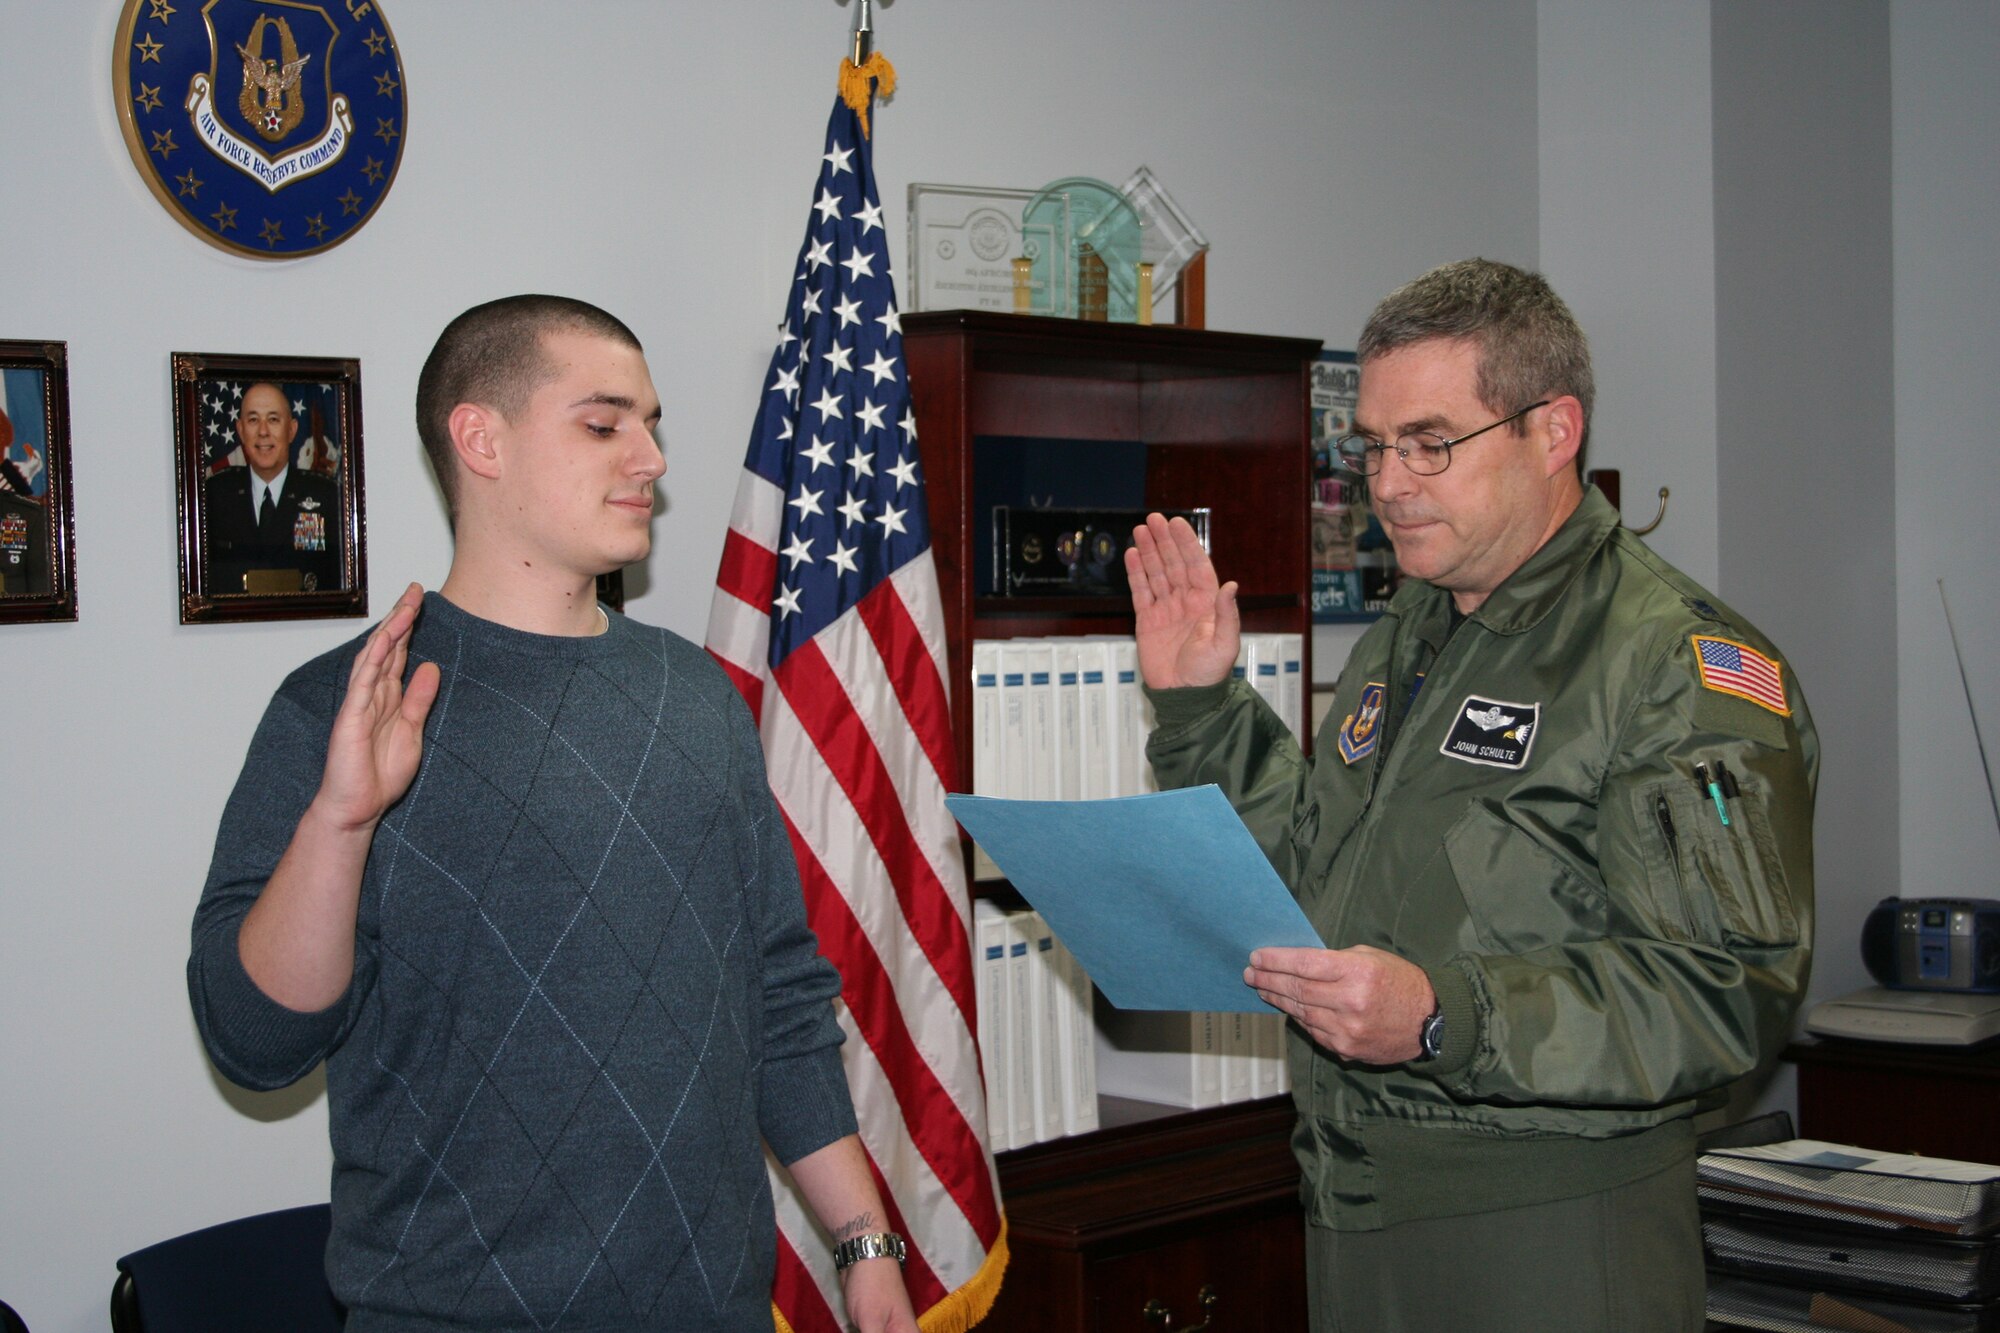 WRIGHT-PATTERSON AFB, Ohio - Lt. Col. John Schulte, 910th Mission Support Group Deputy Commander, gives the Oath of Enlistment to his son Bray Schulte Jan. 18, 2008.  Bray will be assigned to the 445th Airlift Wing, working in the Security Forces Squadron.  Bray's mother, Col. Anna Schulte, is the 445th Maintenance Group commander. (U.S. Air Force photo/Laura Darden)